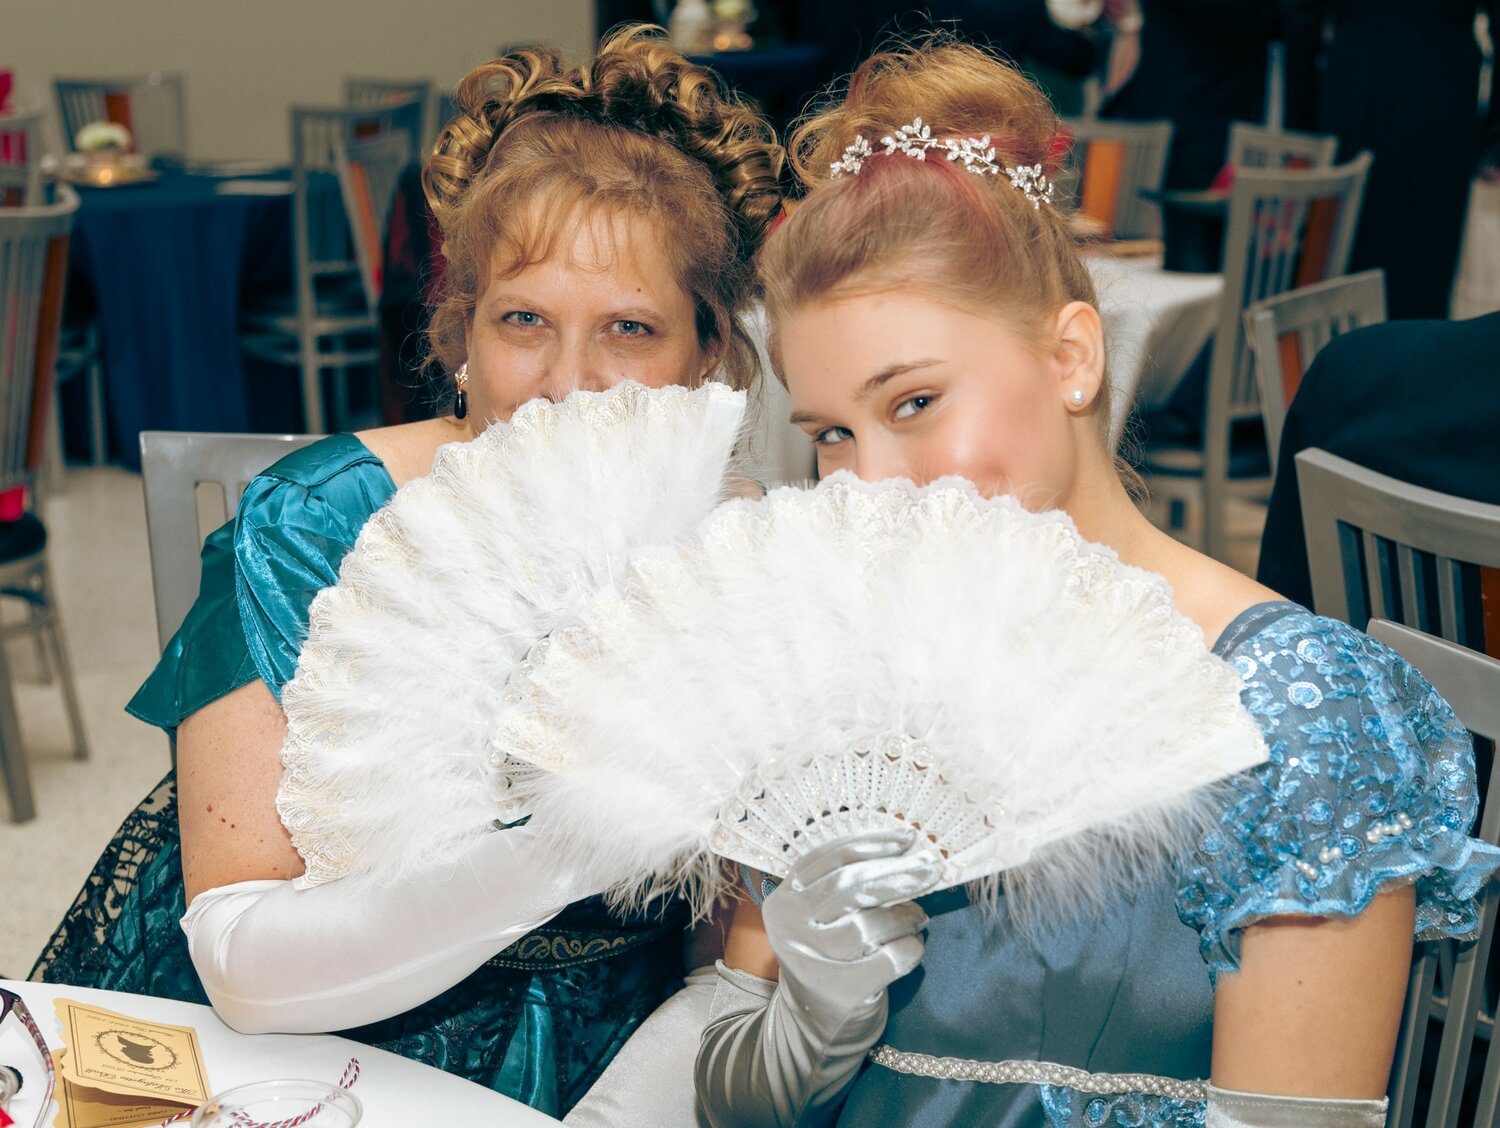 Jeannie and Emily Fise show a bit of modesty at Saturday night's Lafayette’s Grand Birthday Ball at SkyView on Hay.